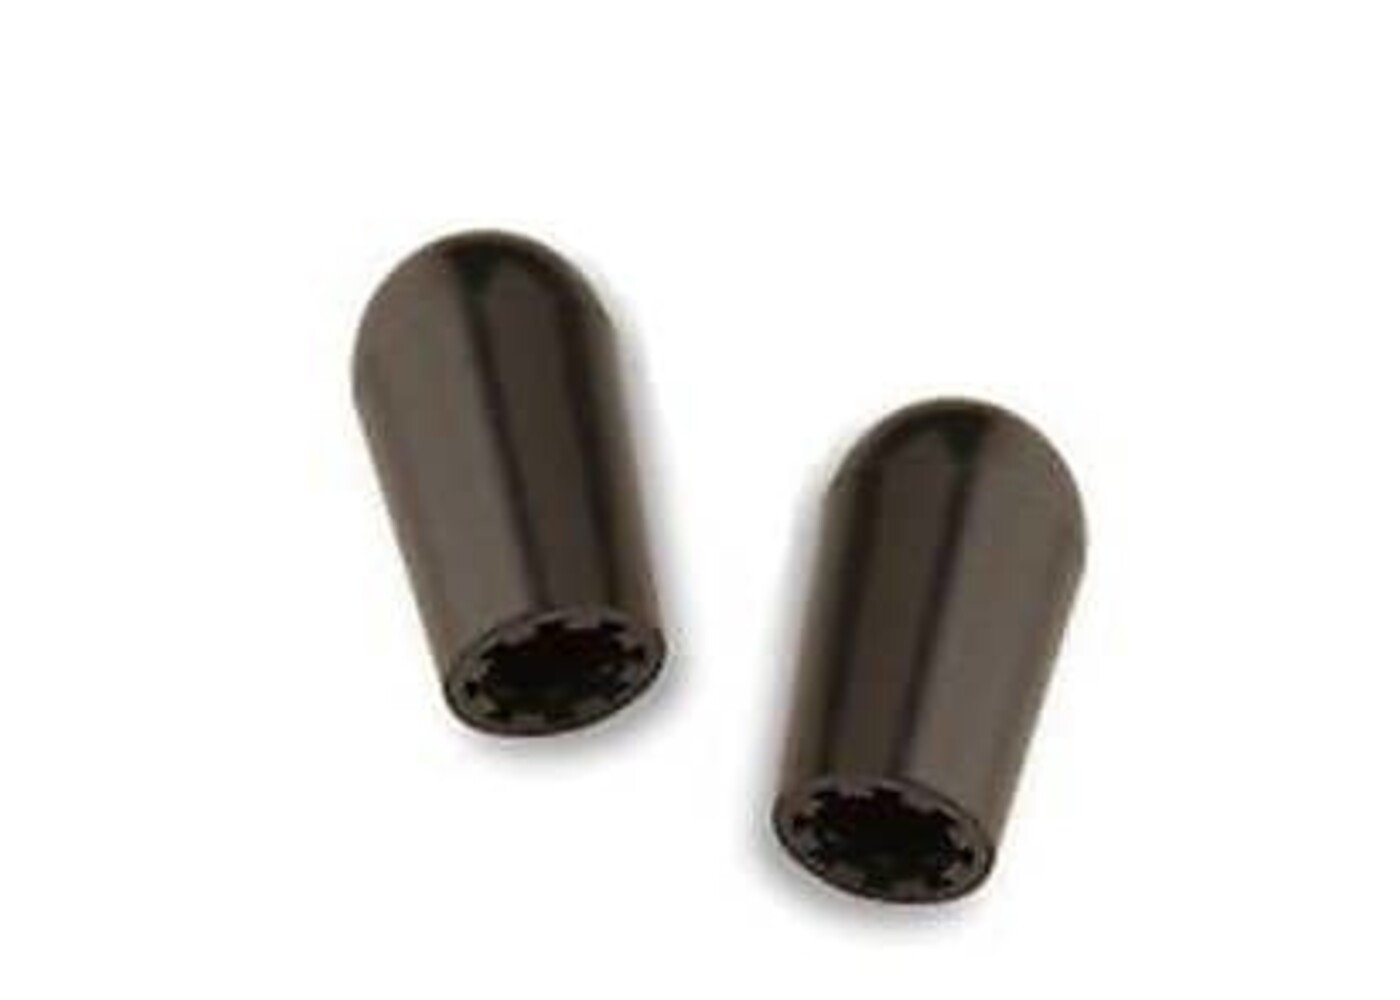 Switchcraft 3-Way Toggle Switch Tip - Black (Metric) (Set of 2)